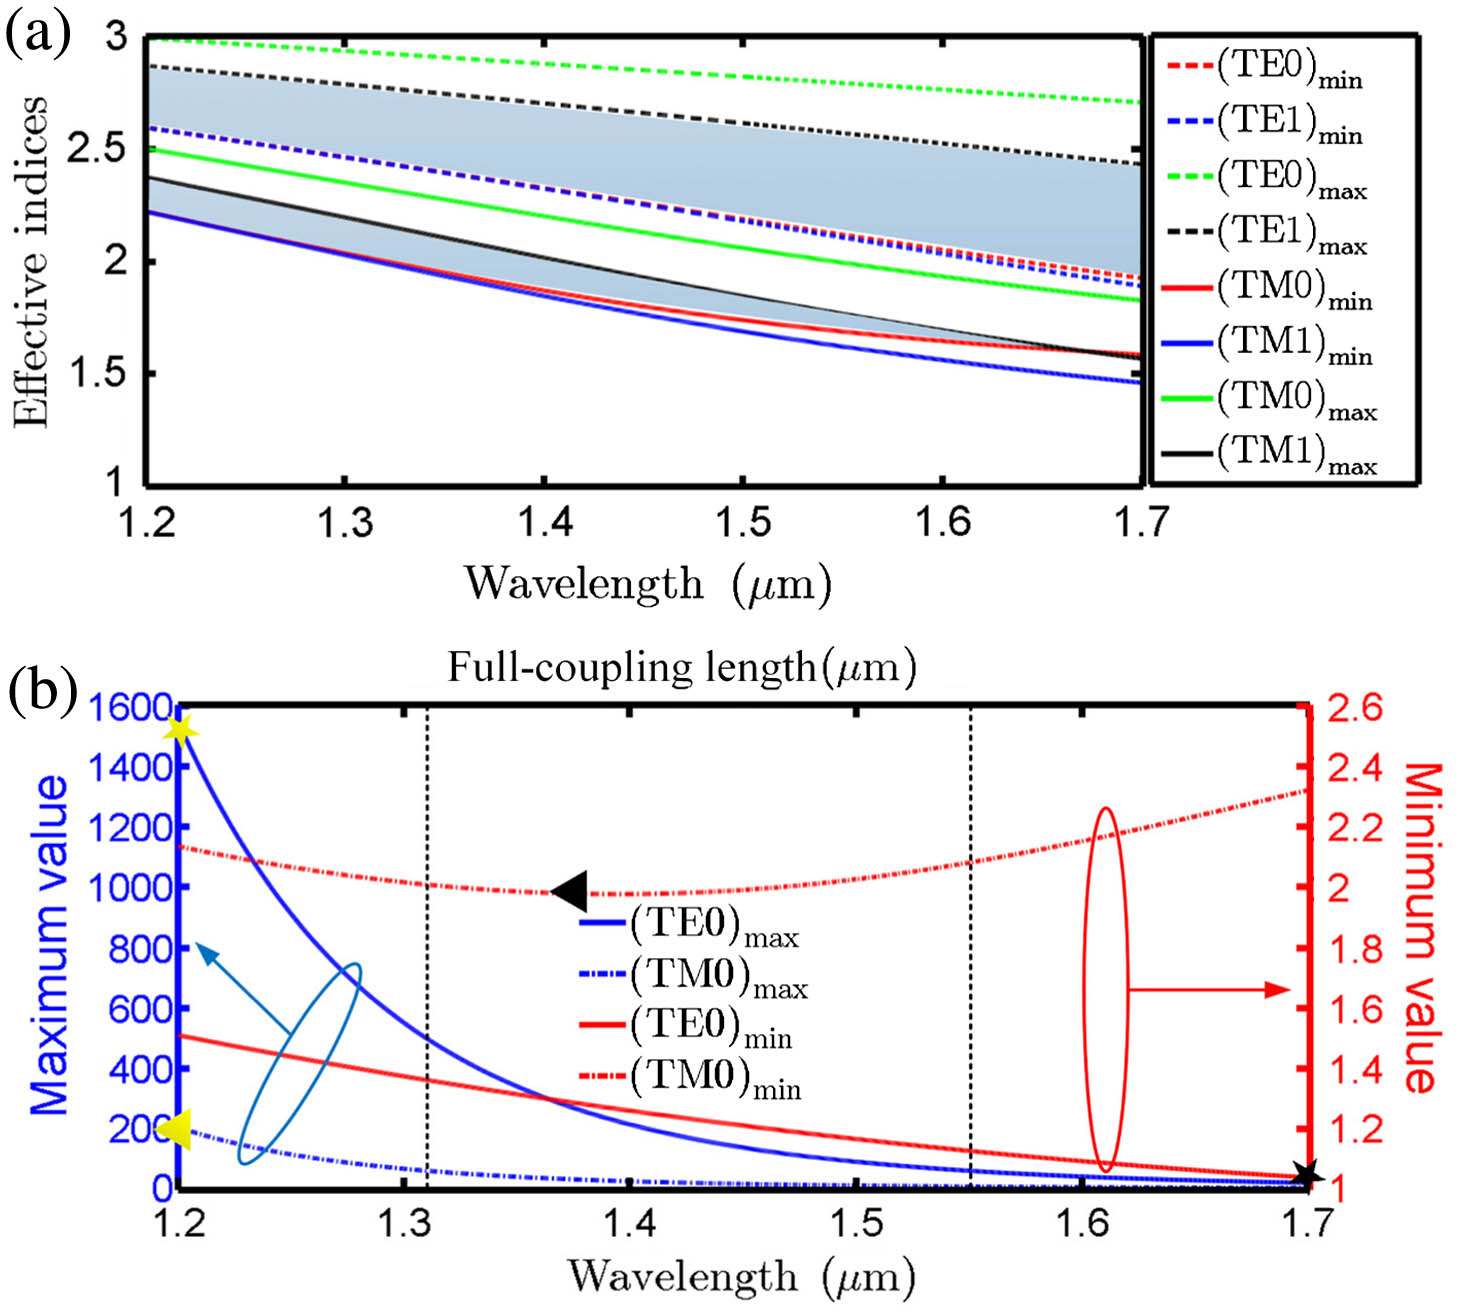 (a) Maximum value and minimum value of the effective indices of different modes as a function of wavelength, where the shaded part represents the overlap between TE0 (TM0) and TE1 (TM1). (b) Full-coupling lengths of the fundamental TE (solid line) and TM (dotted line) modes as a function of wavelength, where the blue line represents the maximum value, the red line represents the minimum value, the yellow (black) star represents the maximum (minimum) value of TE mode, the yellow (black) triangle represents the maximum (minimum) value of TM mode, and the black dashed line represents the position of the wavelength of 1310 nm and 1550 nm, respectively.